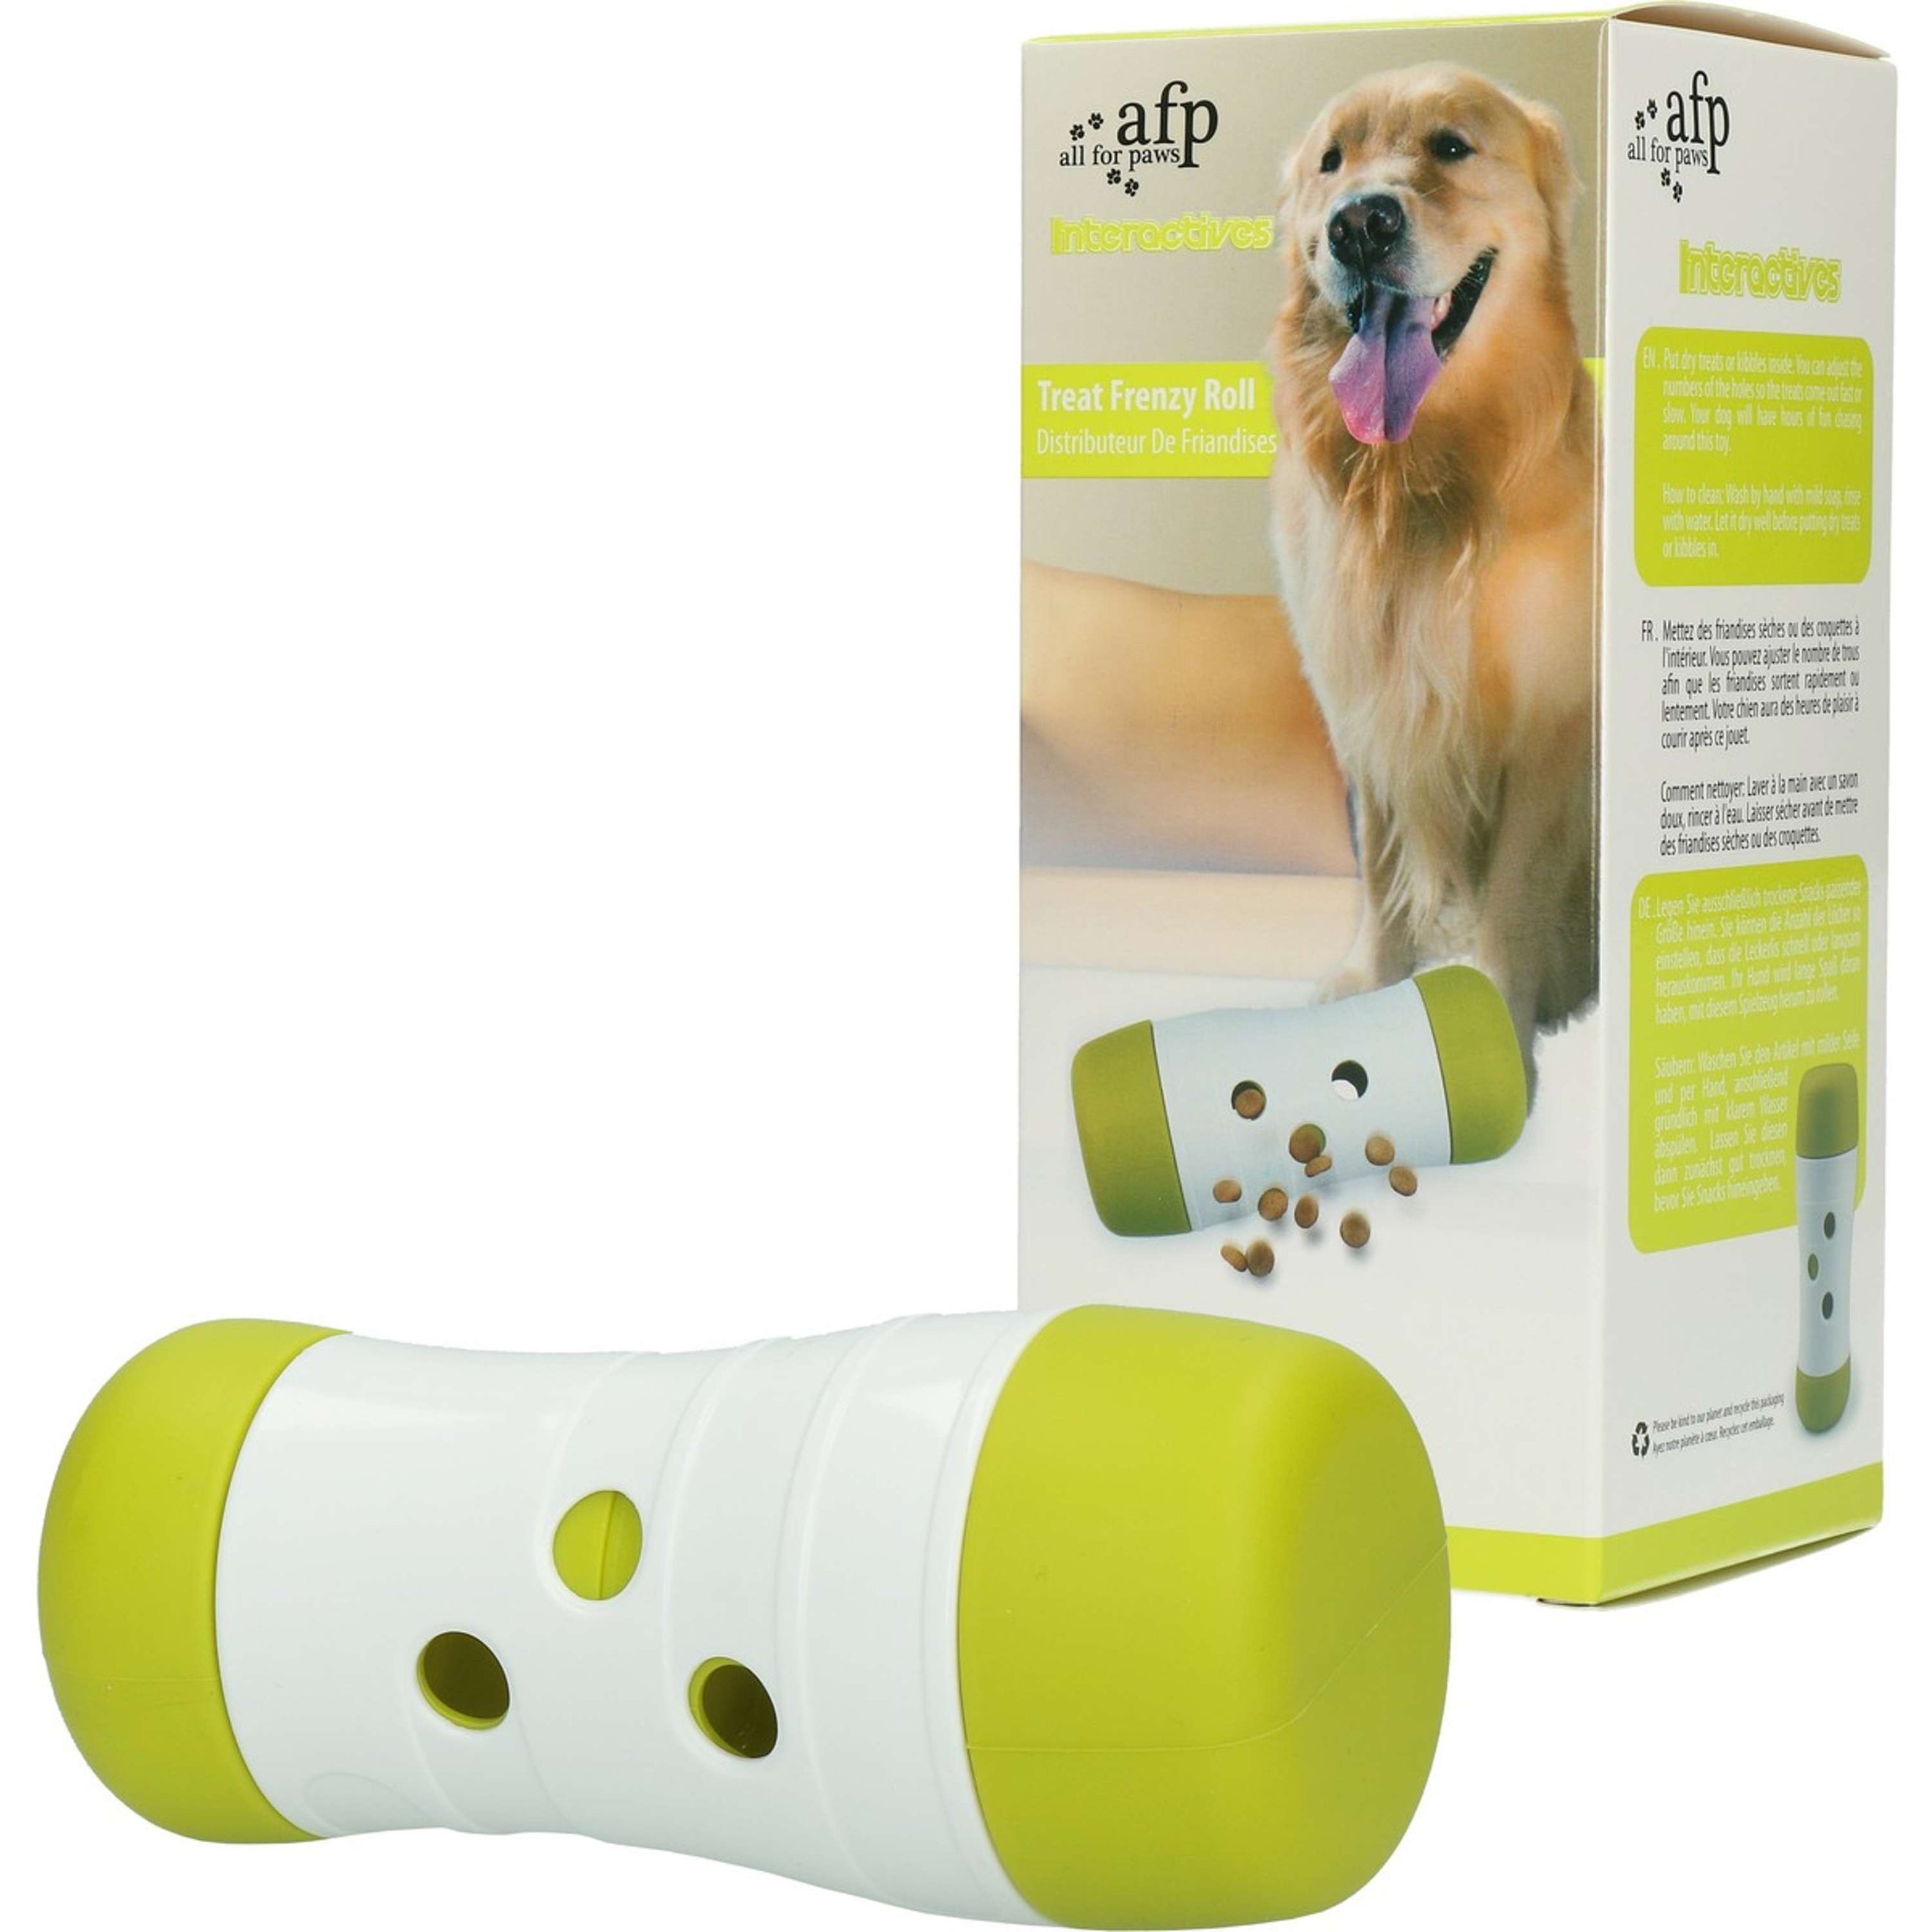 All For Paws Interactives Distributeur Friandises Rouleau Interactive Interactif